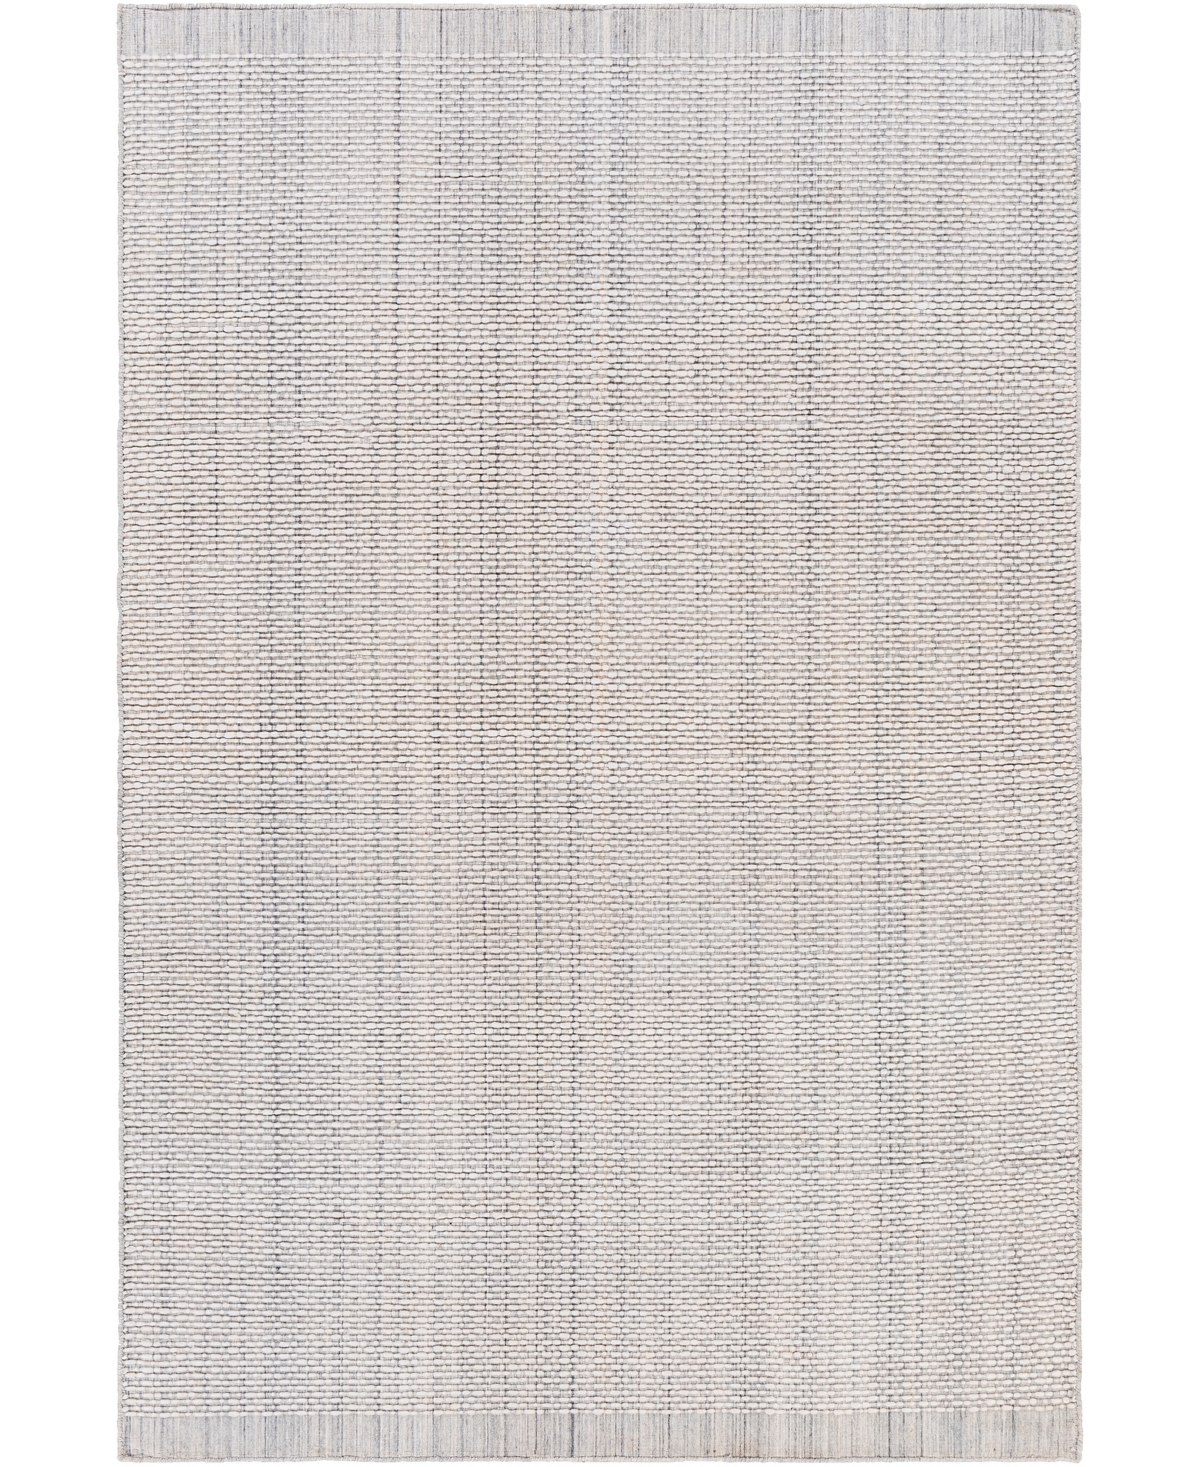 Surya Sycamore Syc-2300 9in x 12' Outdoor Area Rug - White, Gray